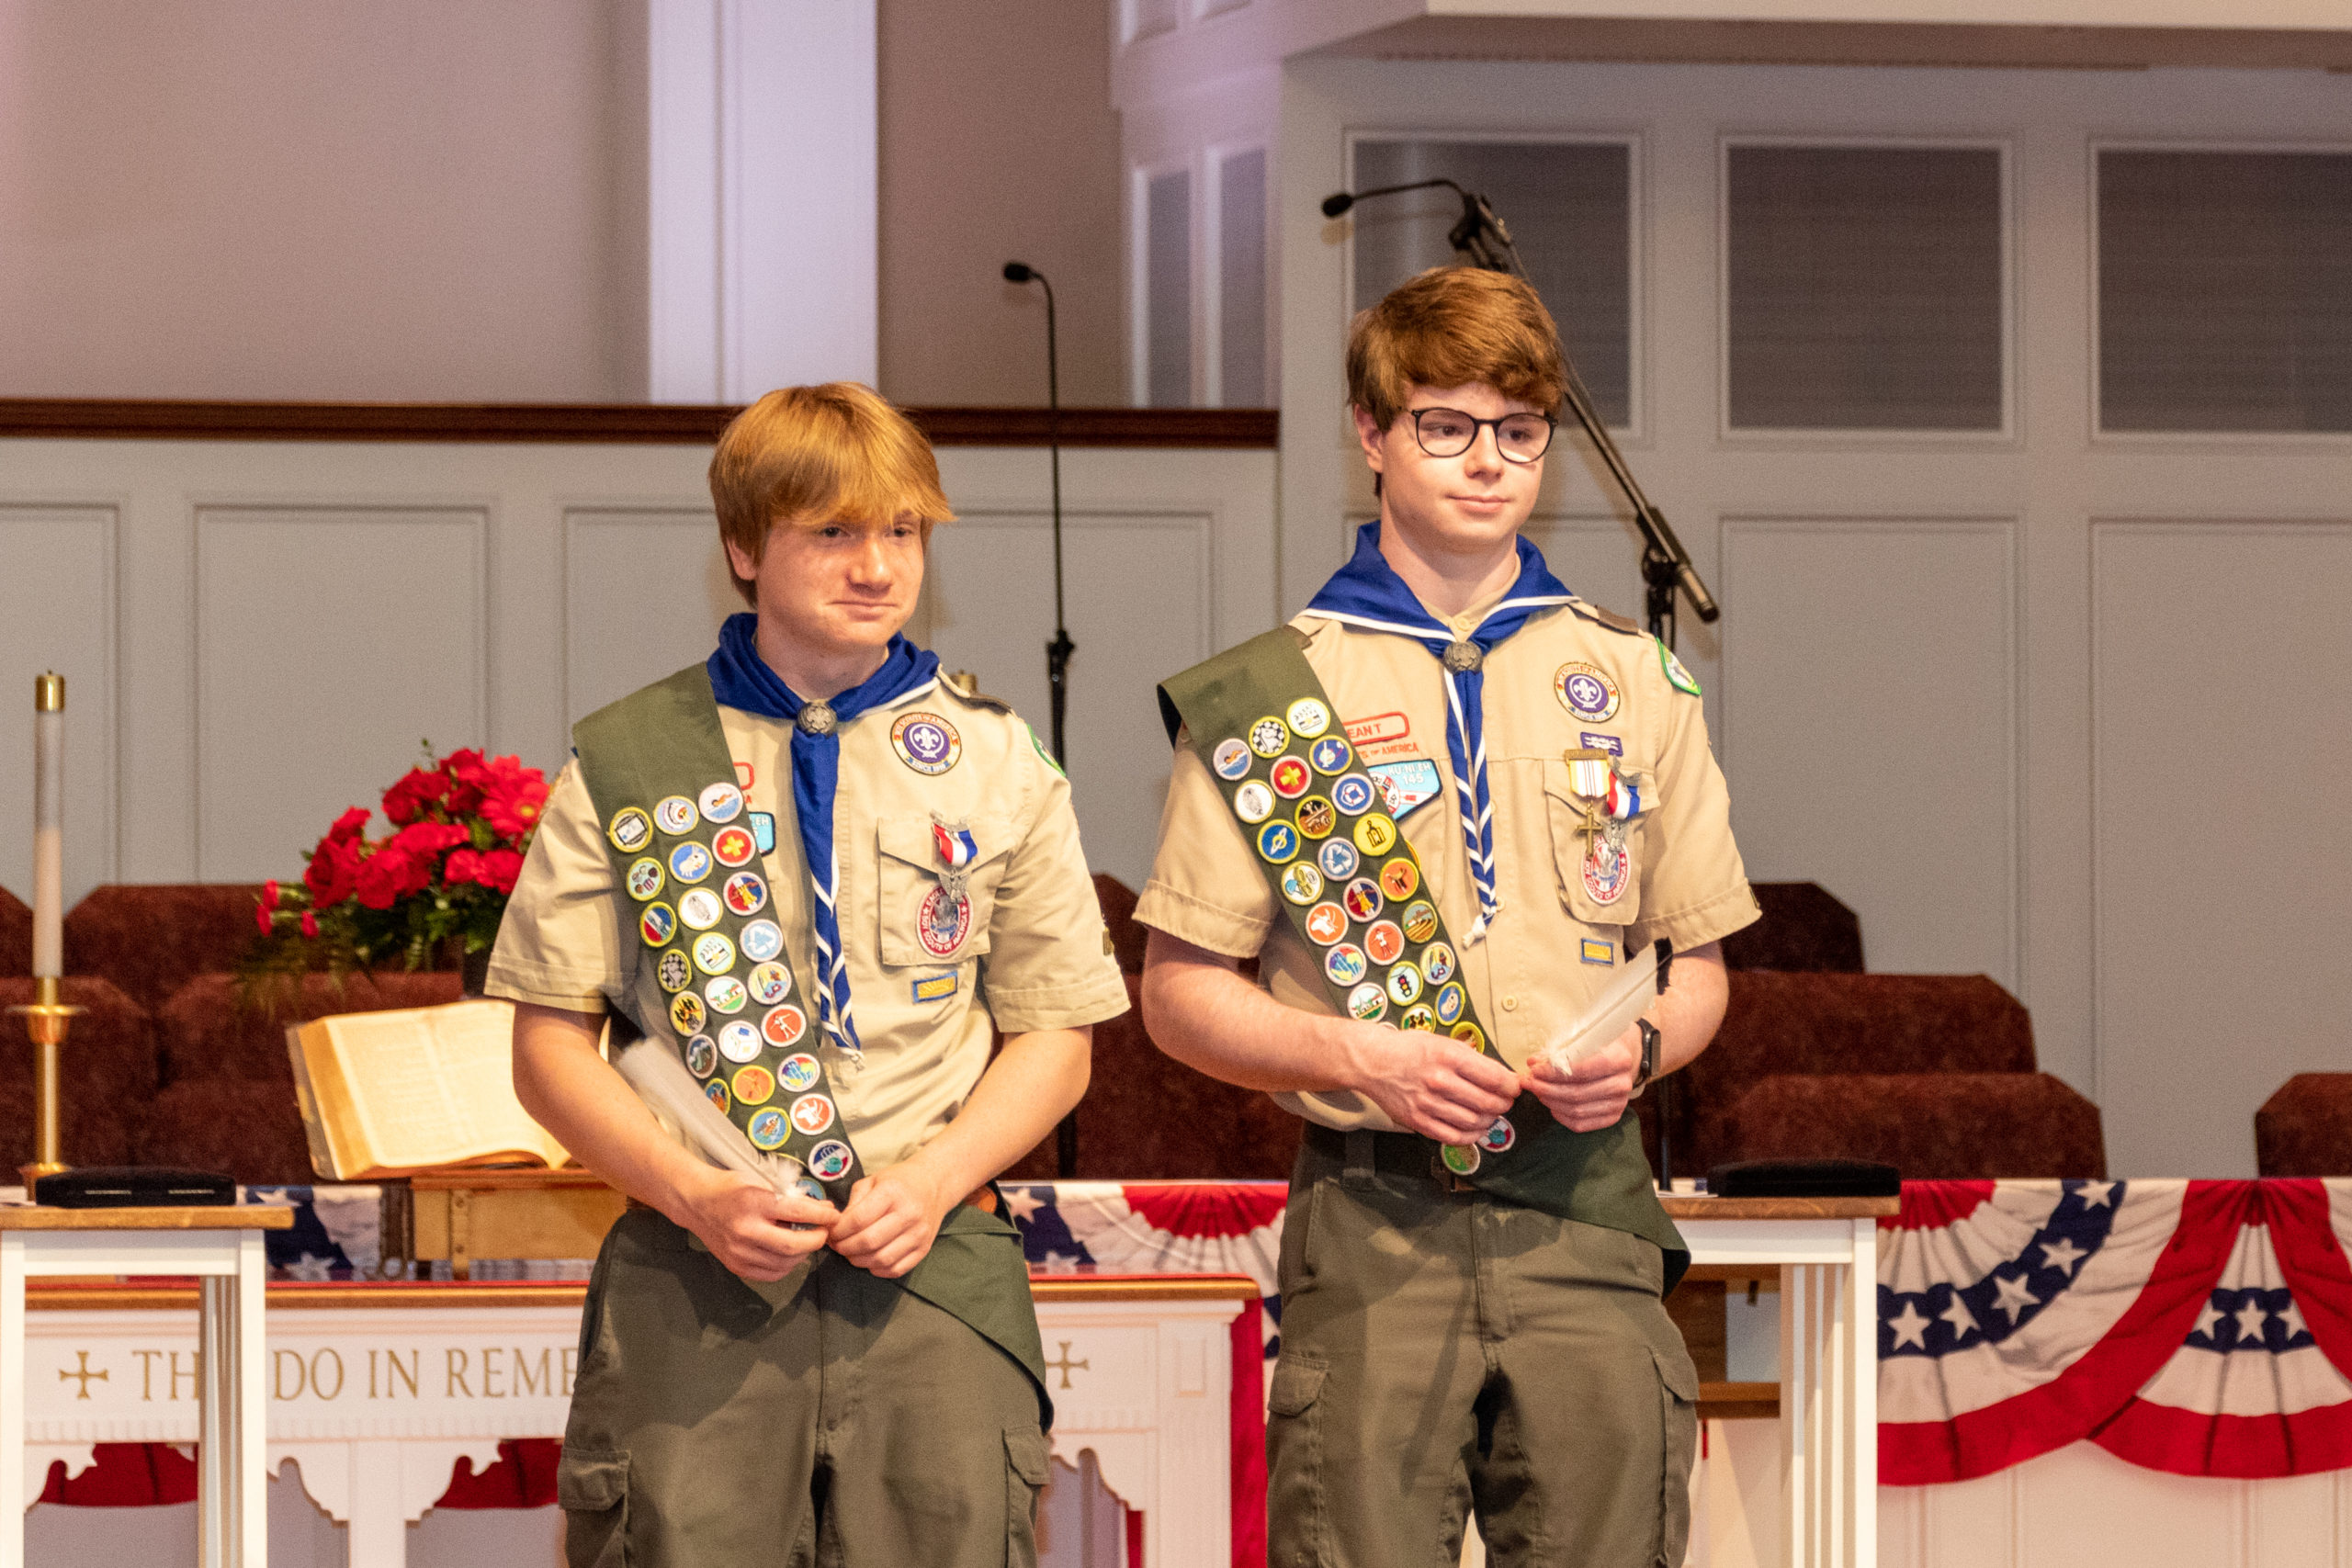 Don't Clap Just Yet for the Boy Scouts